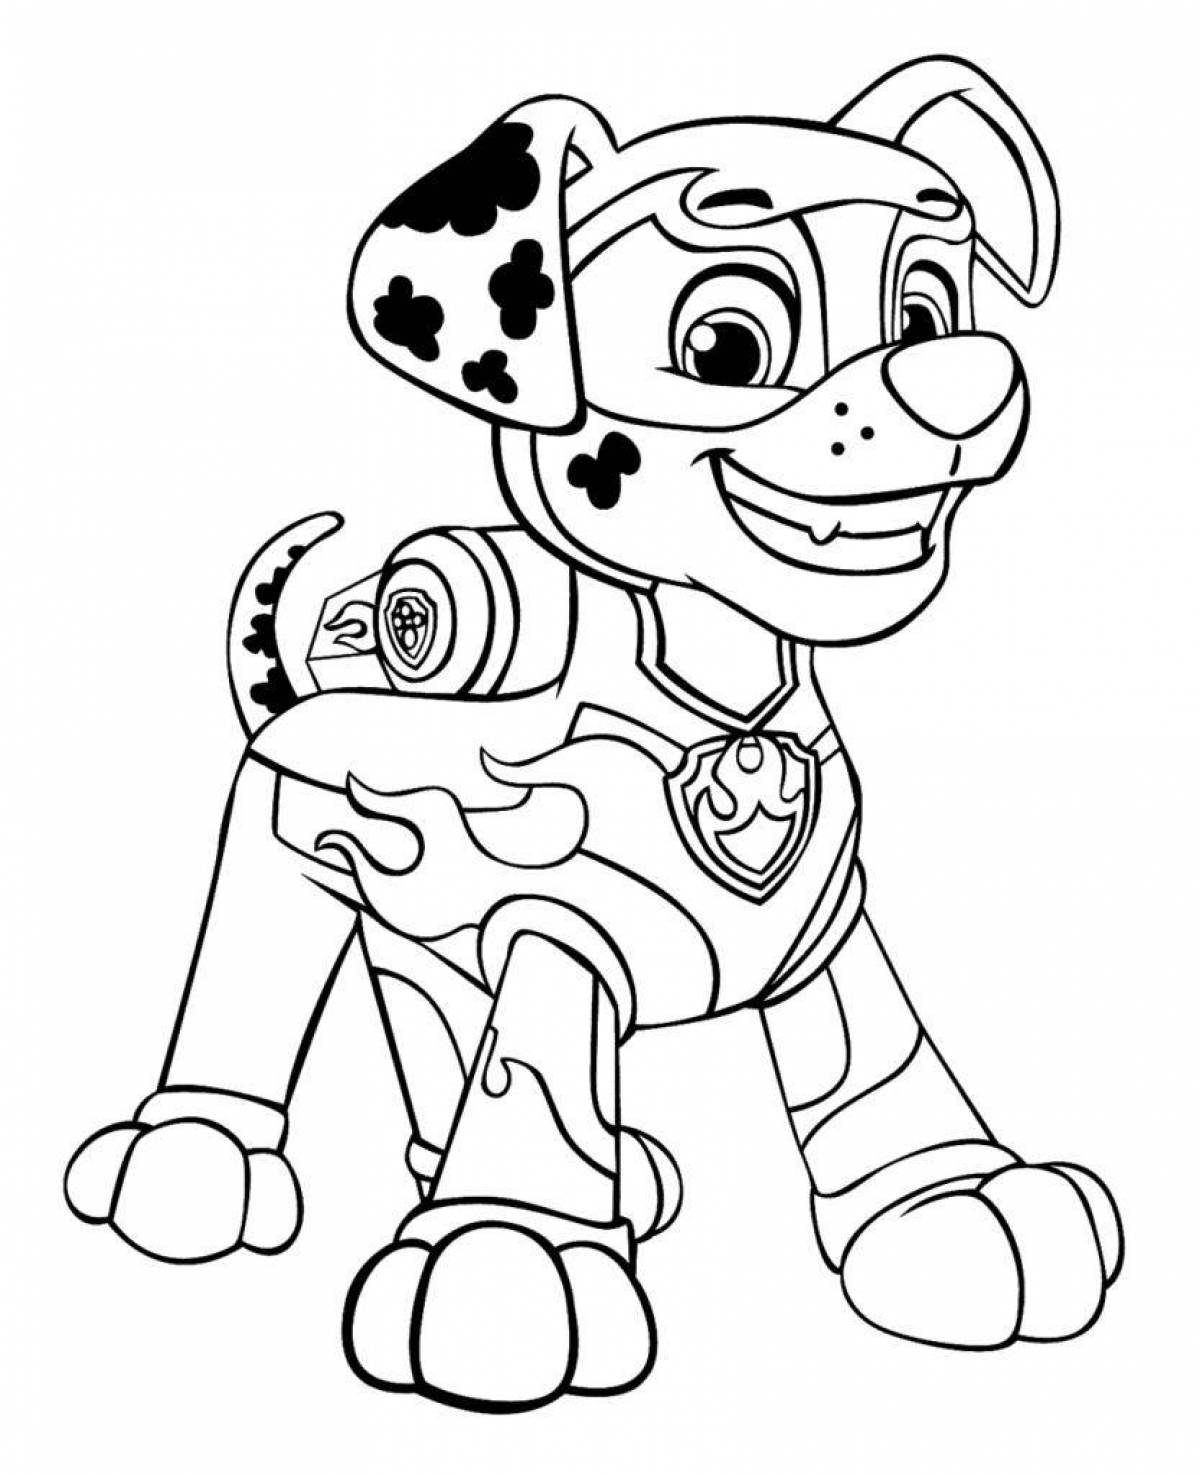 Gorgeous Cute Paw Patrol coloring page